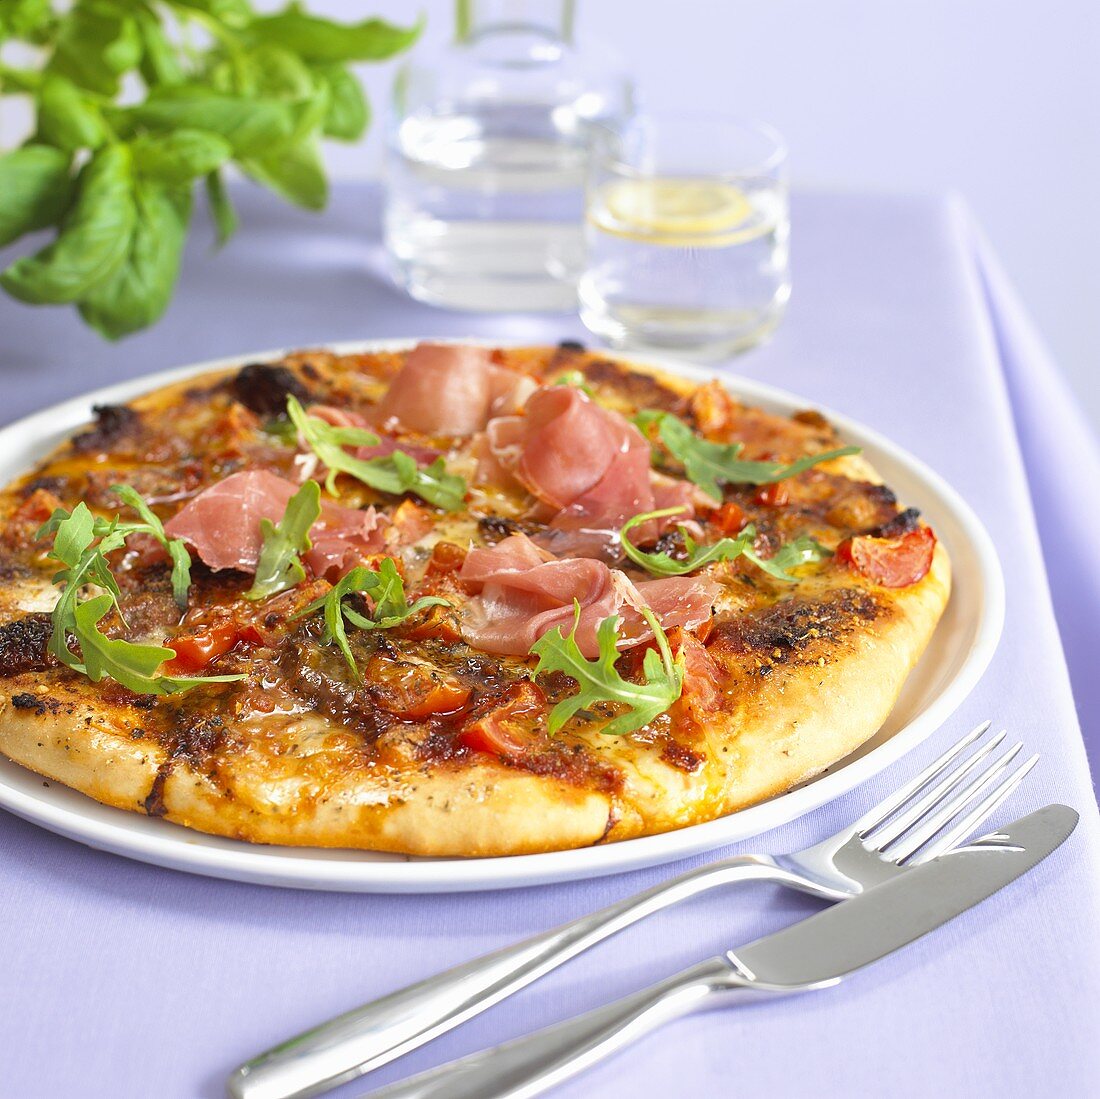 Pizza with ham and rocket